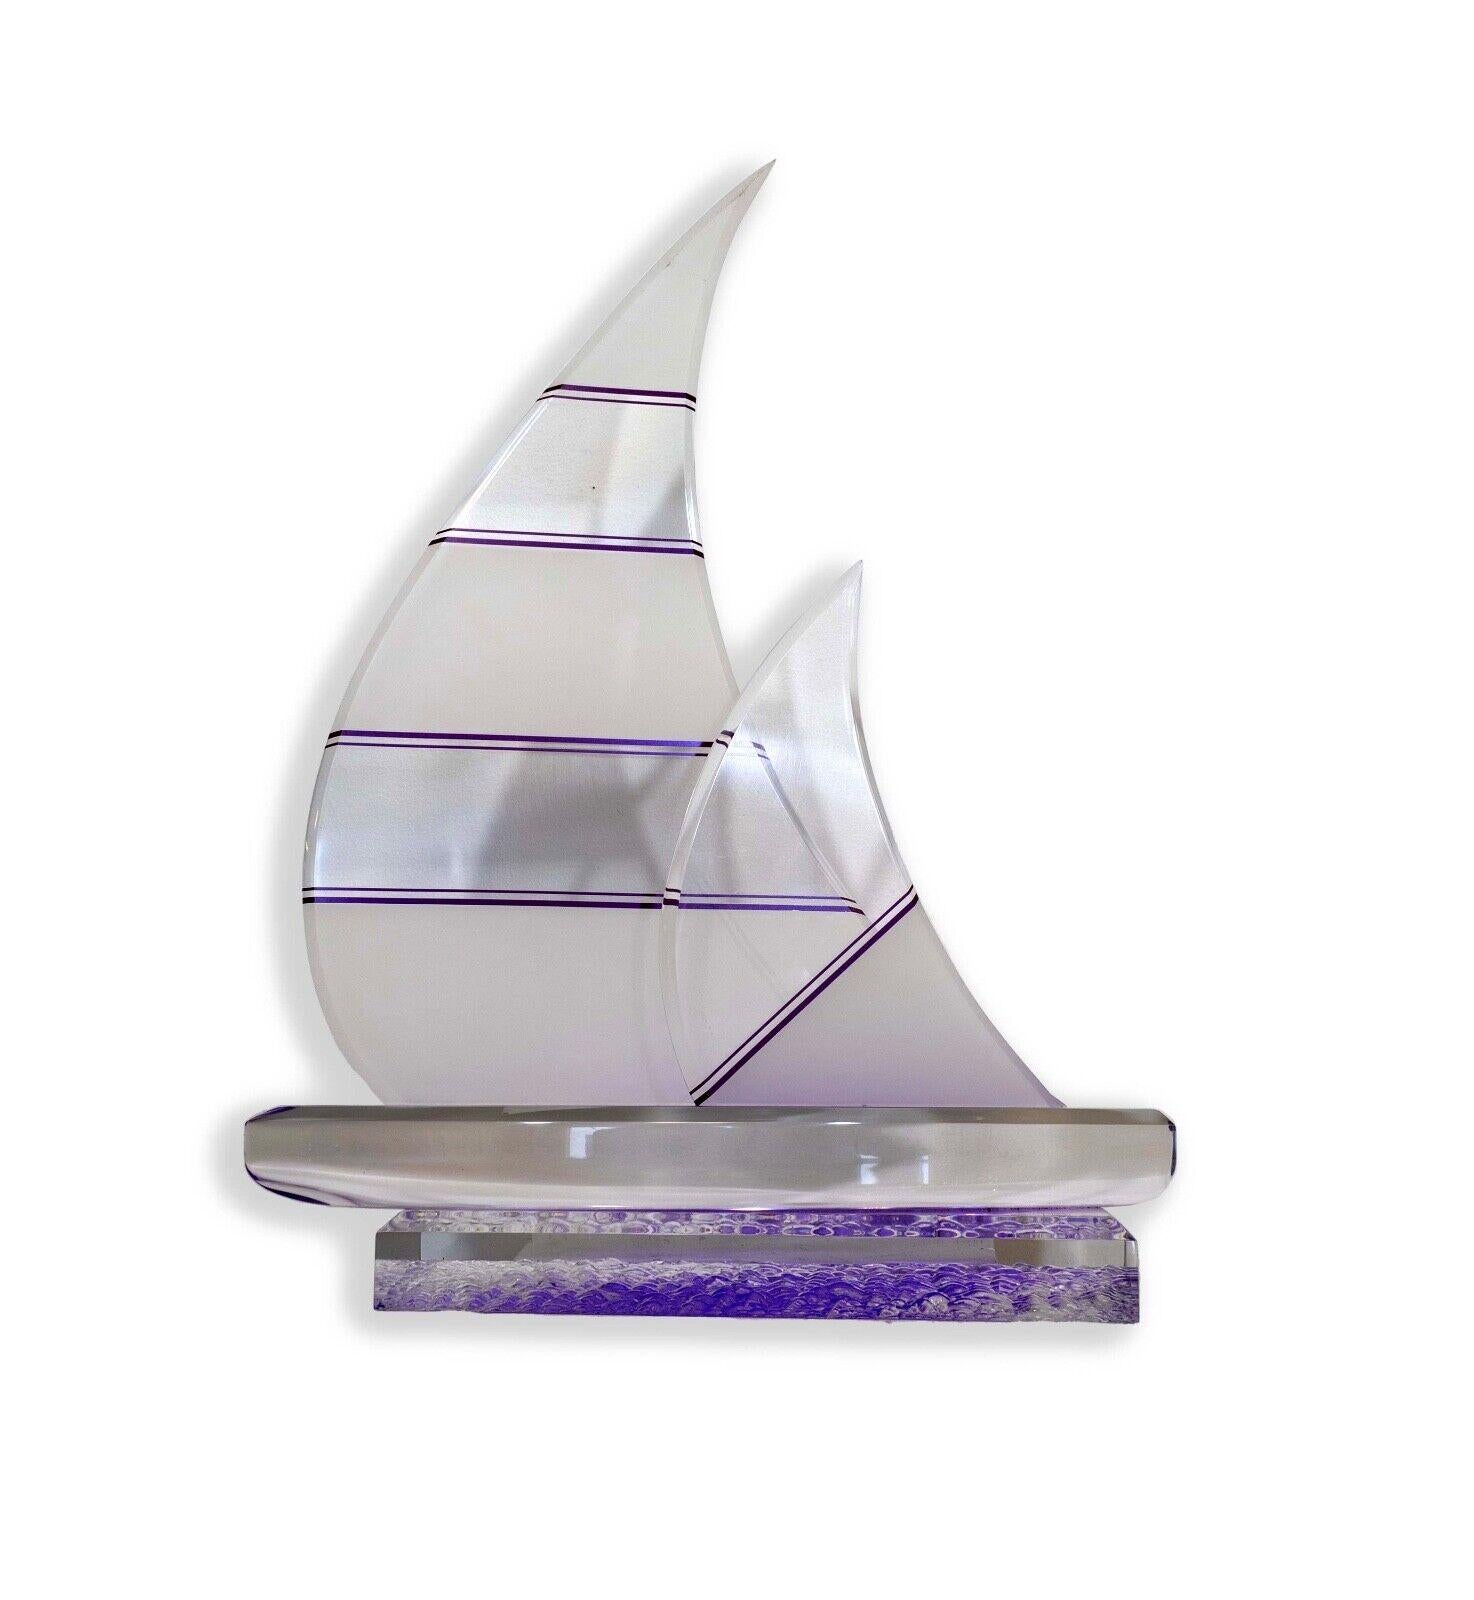 The Shlomi Haziza Lucite Purple and Clear Sailboat Sculpture is a mesmerizing example of contemporary modern art, combining intricate craftsmanship with a unique visual experience. Crafted by the acclaimed artist Shlomi Haziza, this sculpture